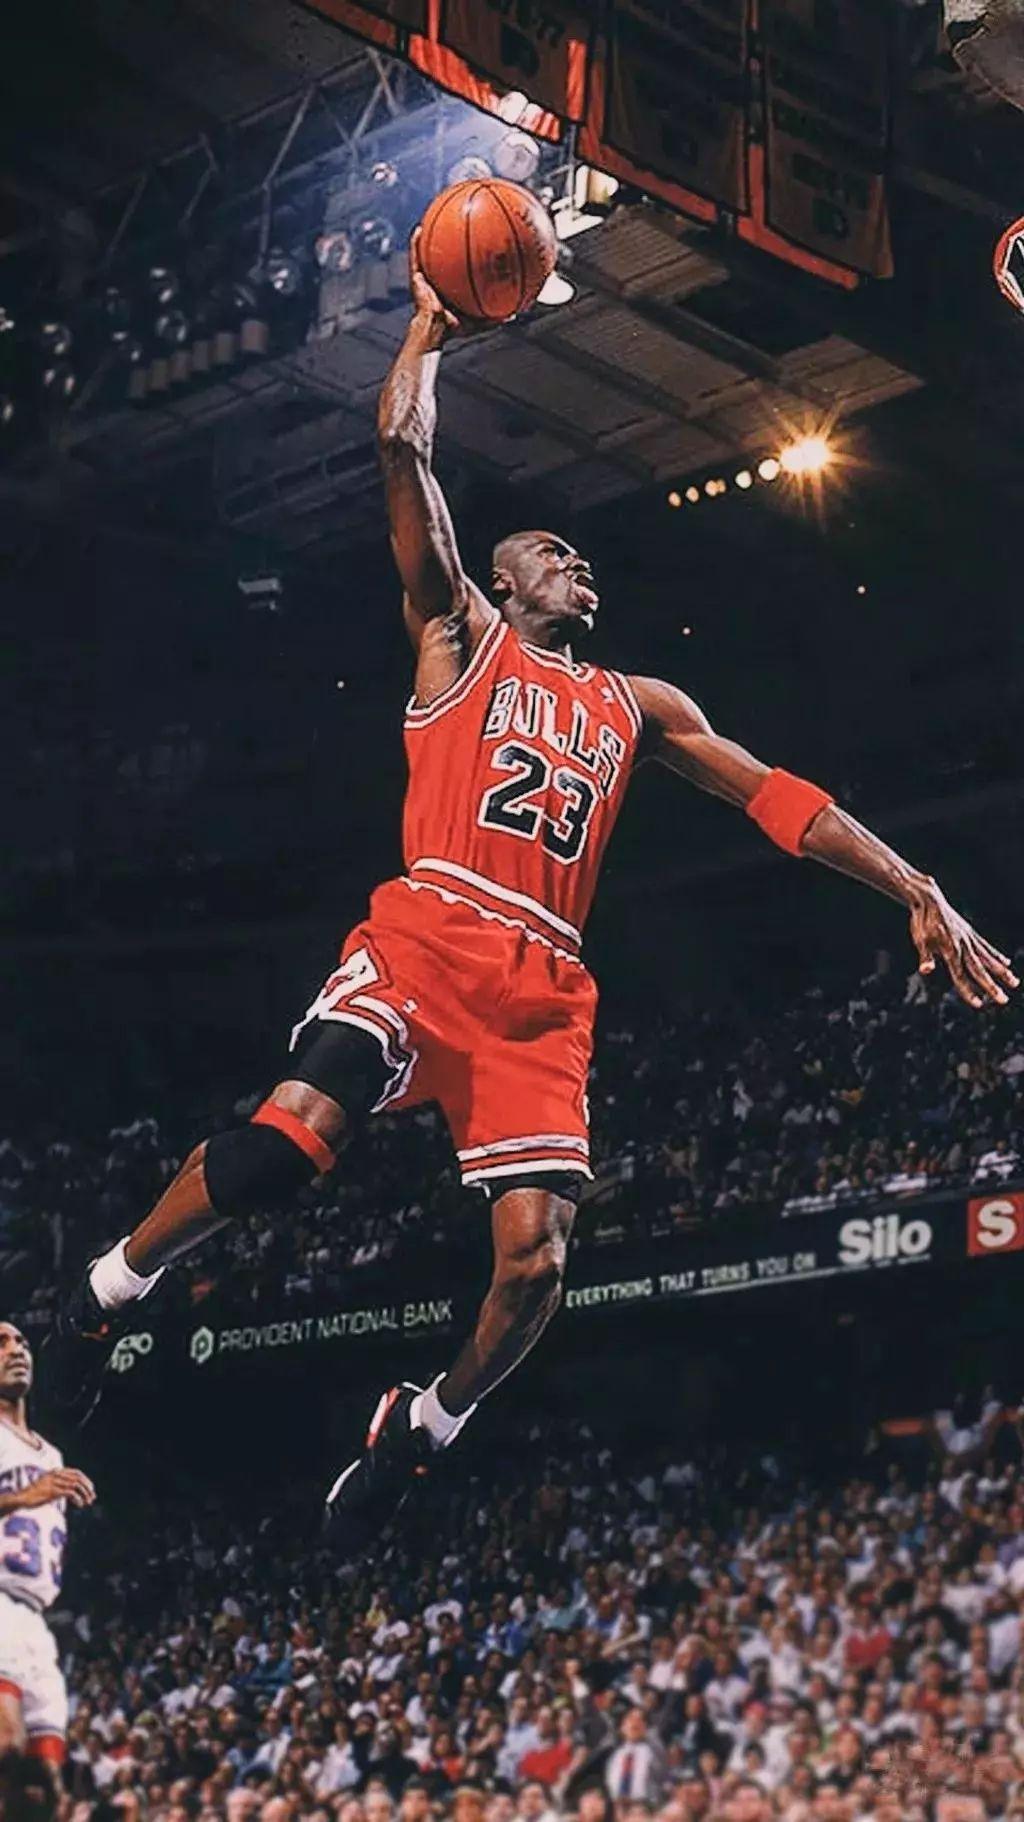 Michael Jordan dunk contest photo explained by SI photographer - Sports Illustrated